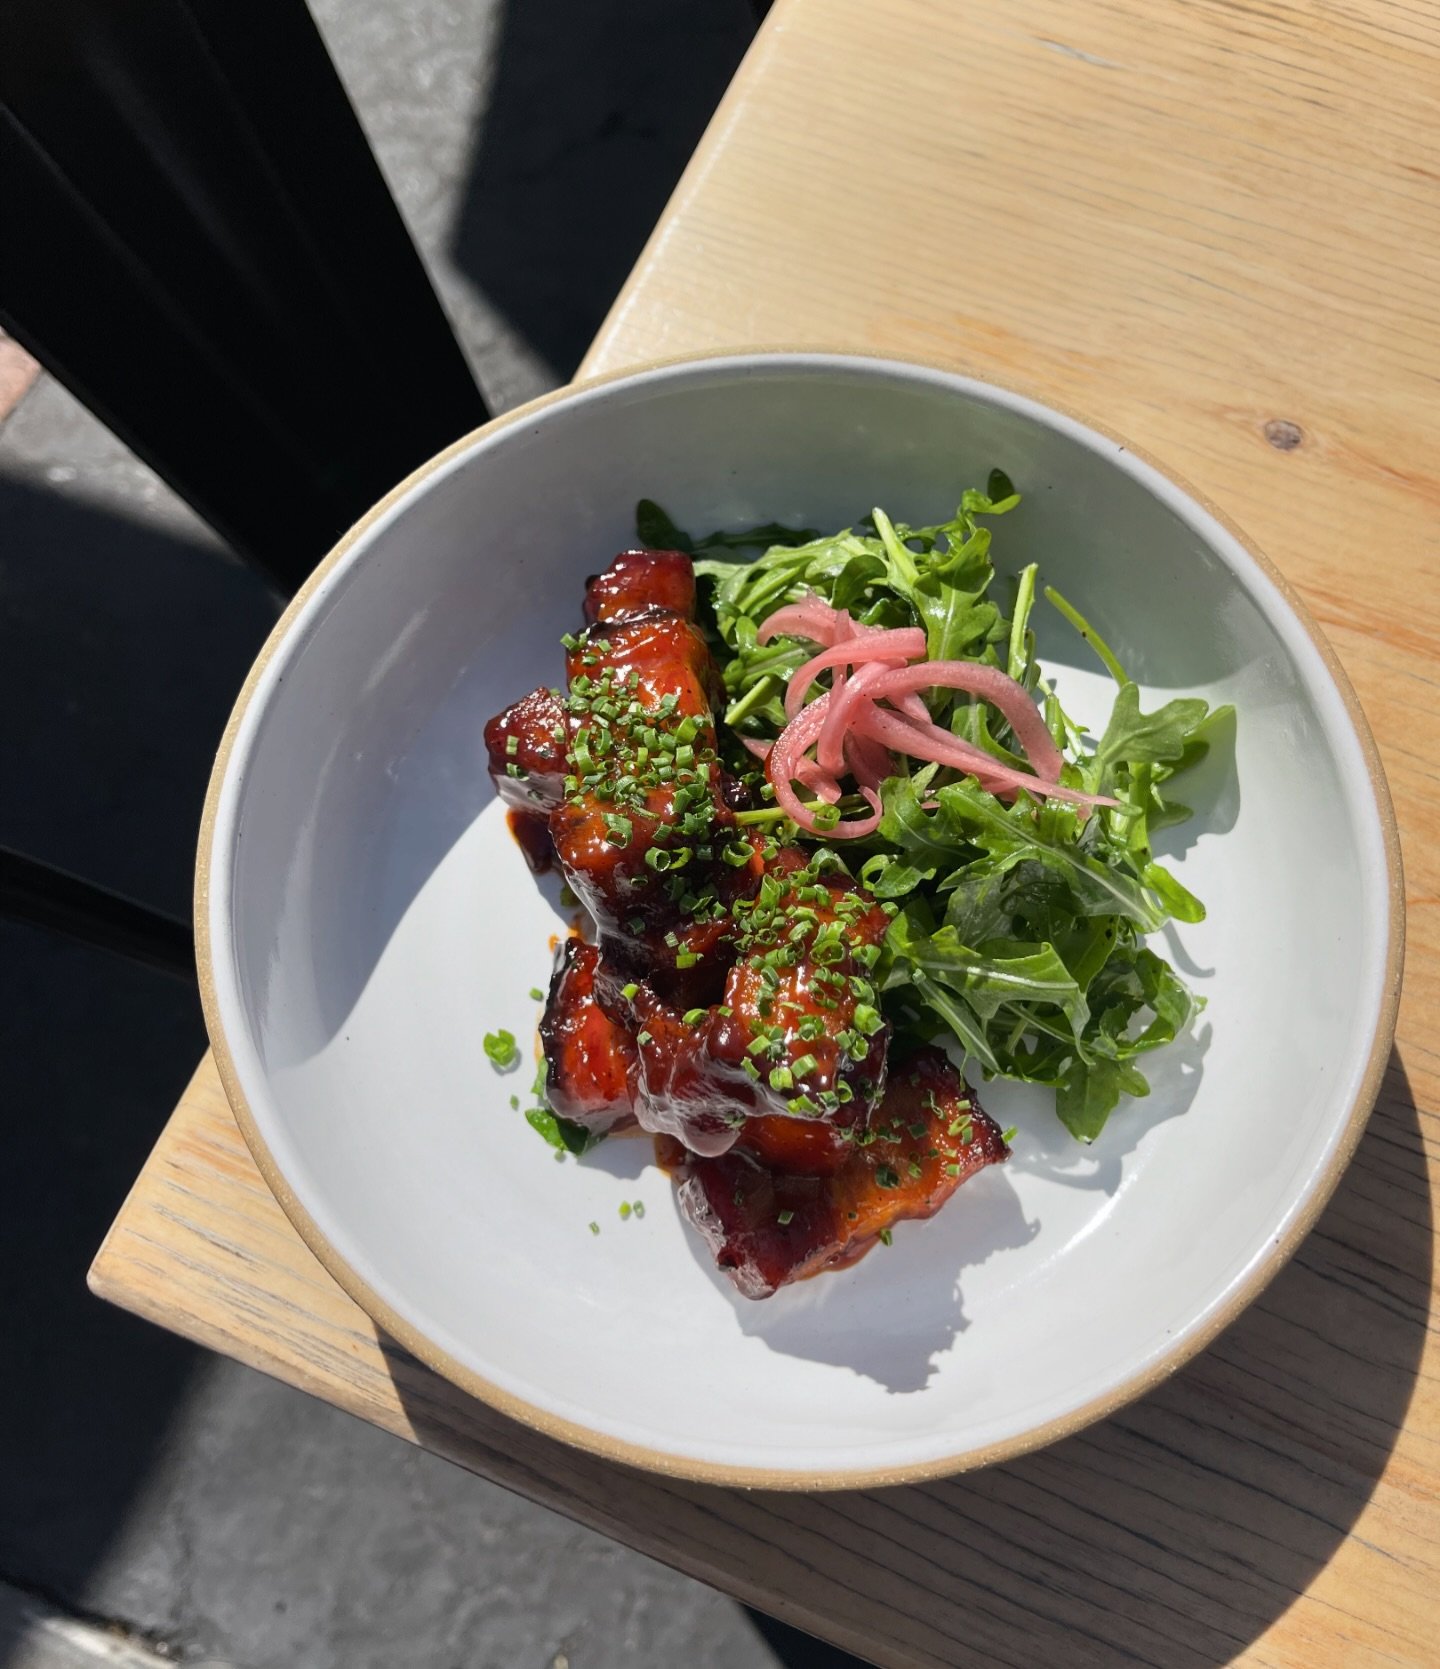 Pork Belly Burnt Ends 
Flash Fried Marinated Pork Belly, Barbeque Sauce, Pickled Onion, Arugula 🌱

Our Hours: 
Mon-Thurs 3-9pm.
Fri-Sat 12-10pm.
Sun 12-9pm.

See you here. 🌙 
&bull; Reservations via yelp, link in bio, phone call or in person. Walk-